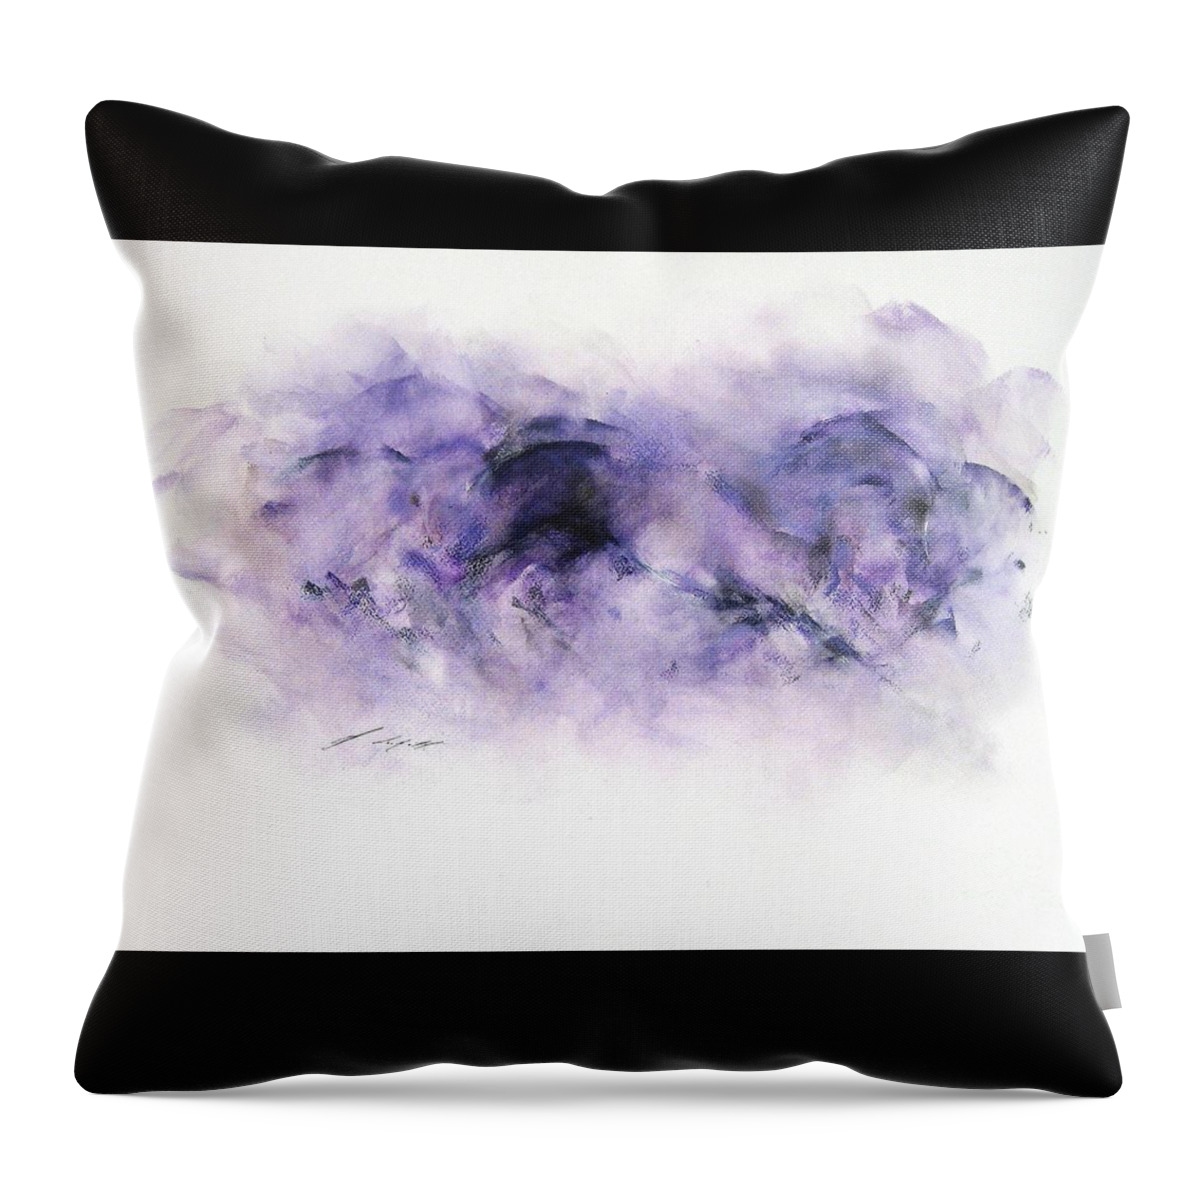 Horse Throw Pillow featuring the painting Equus 5 by Janette Lockett